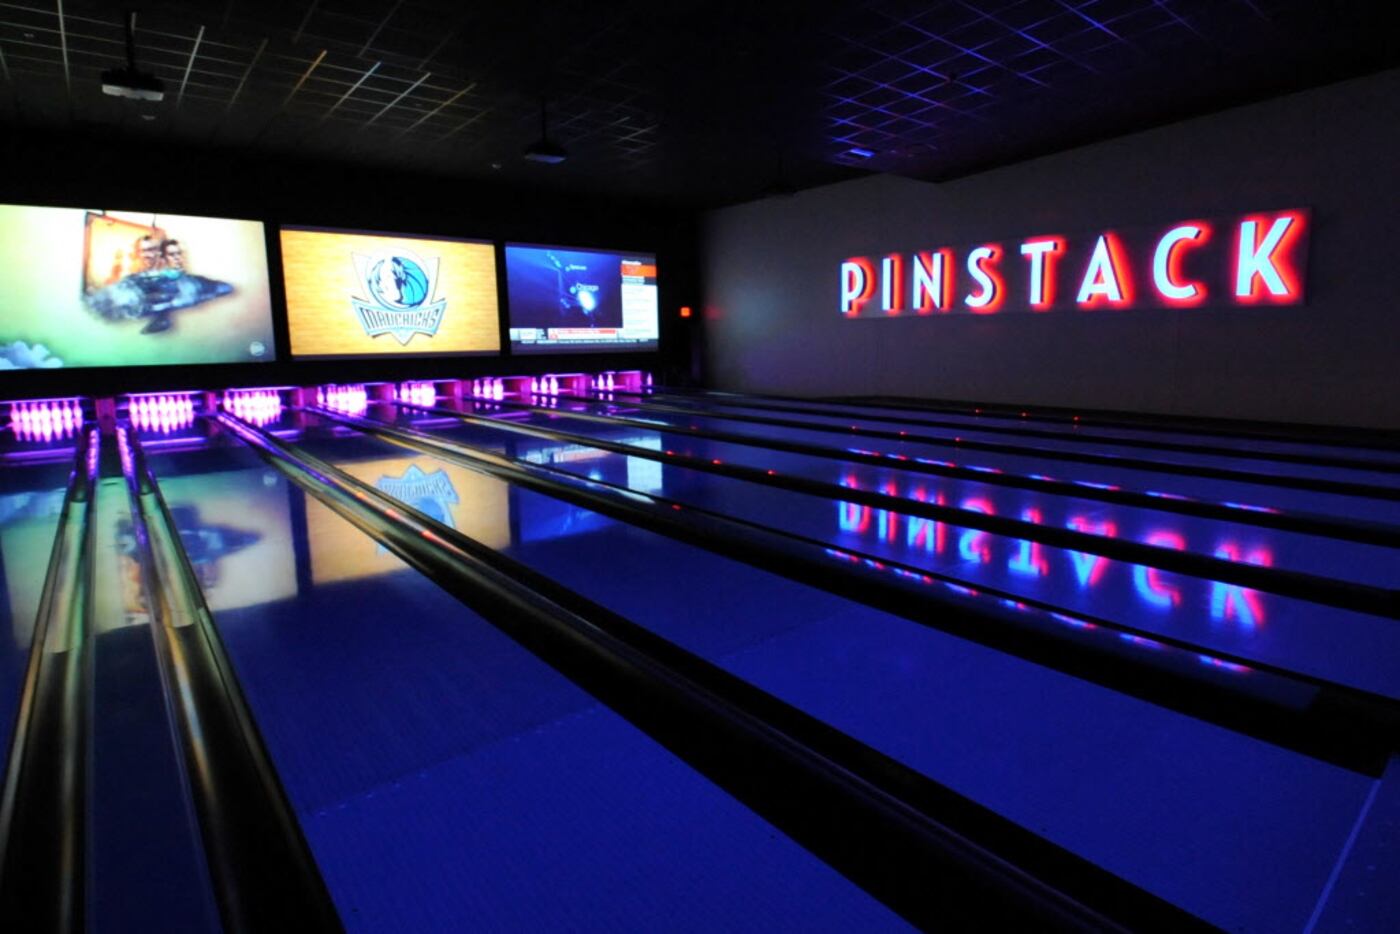 The VIP bowling alley room features eight lanes at Pinstack in Plano, TX on February 4, 2015.